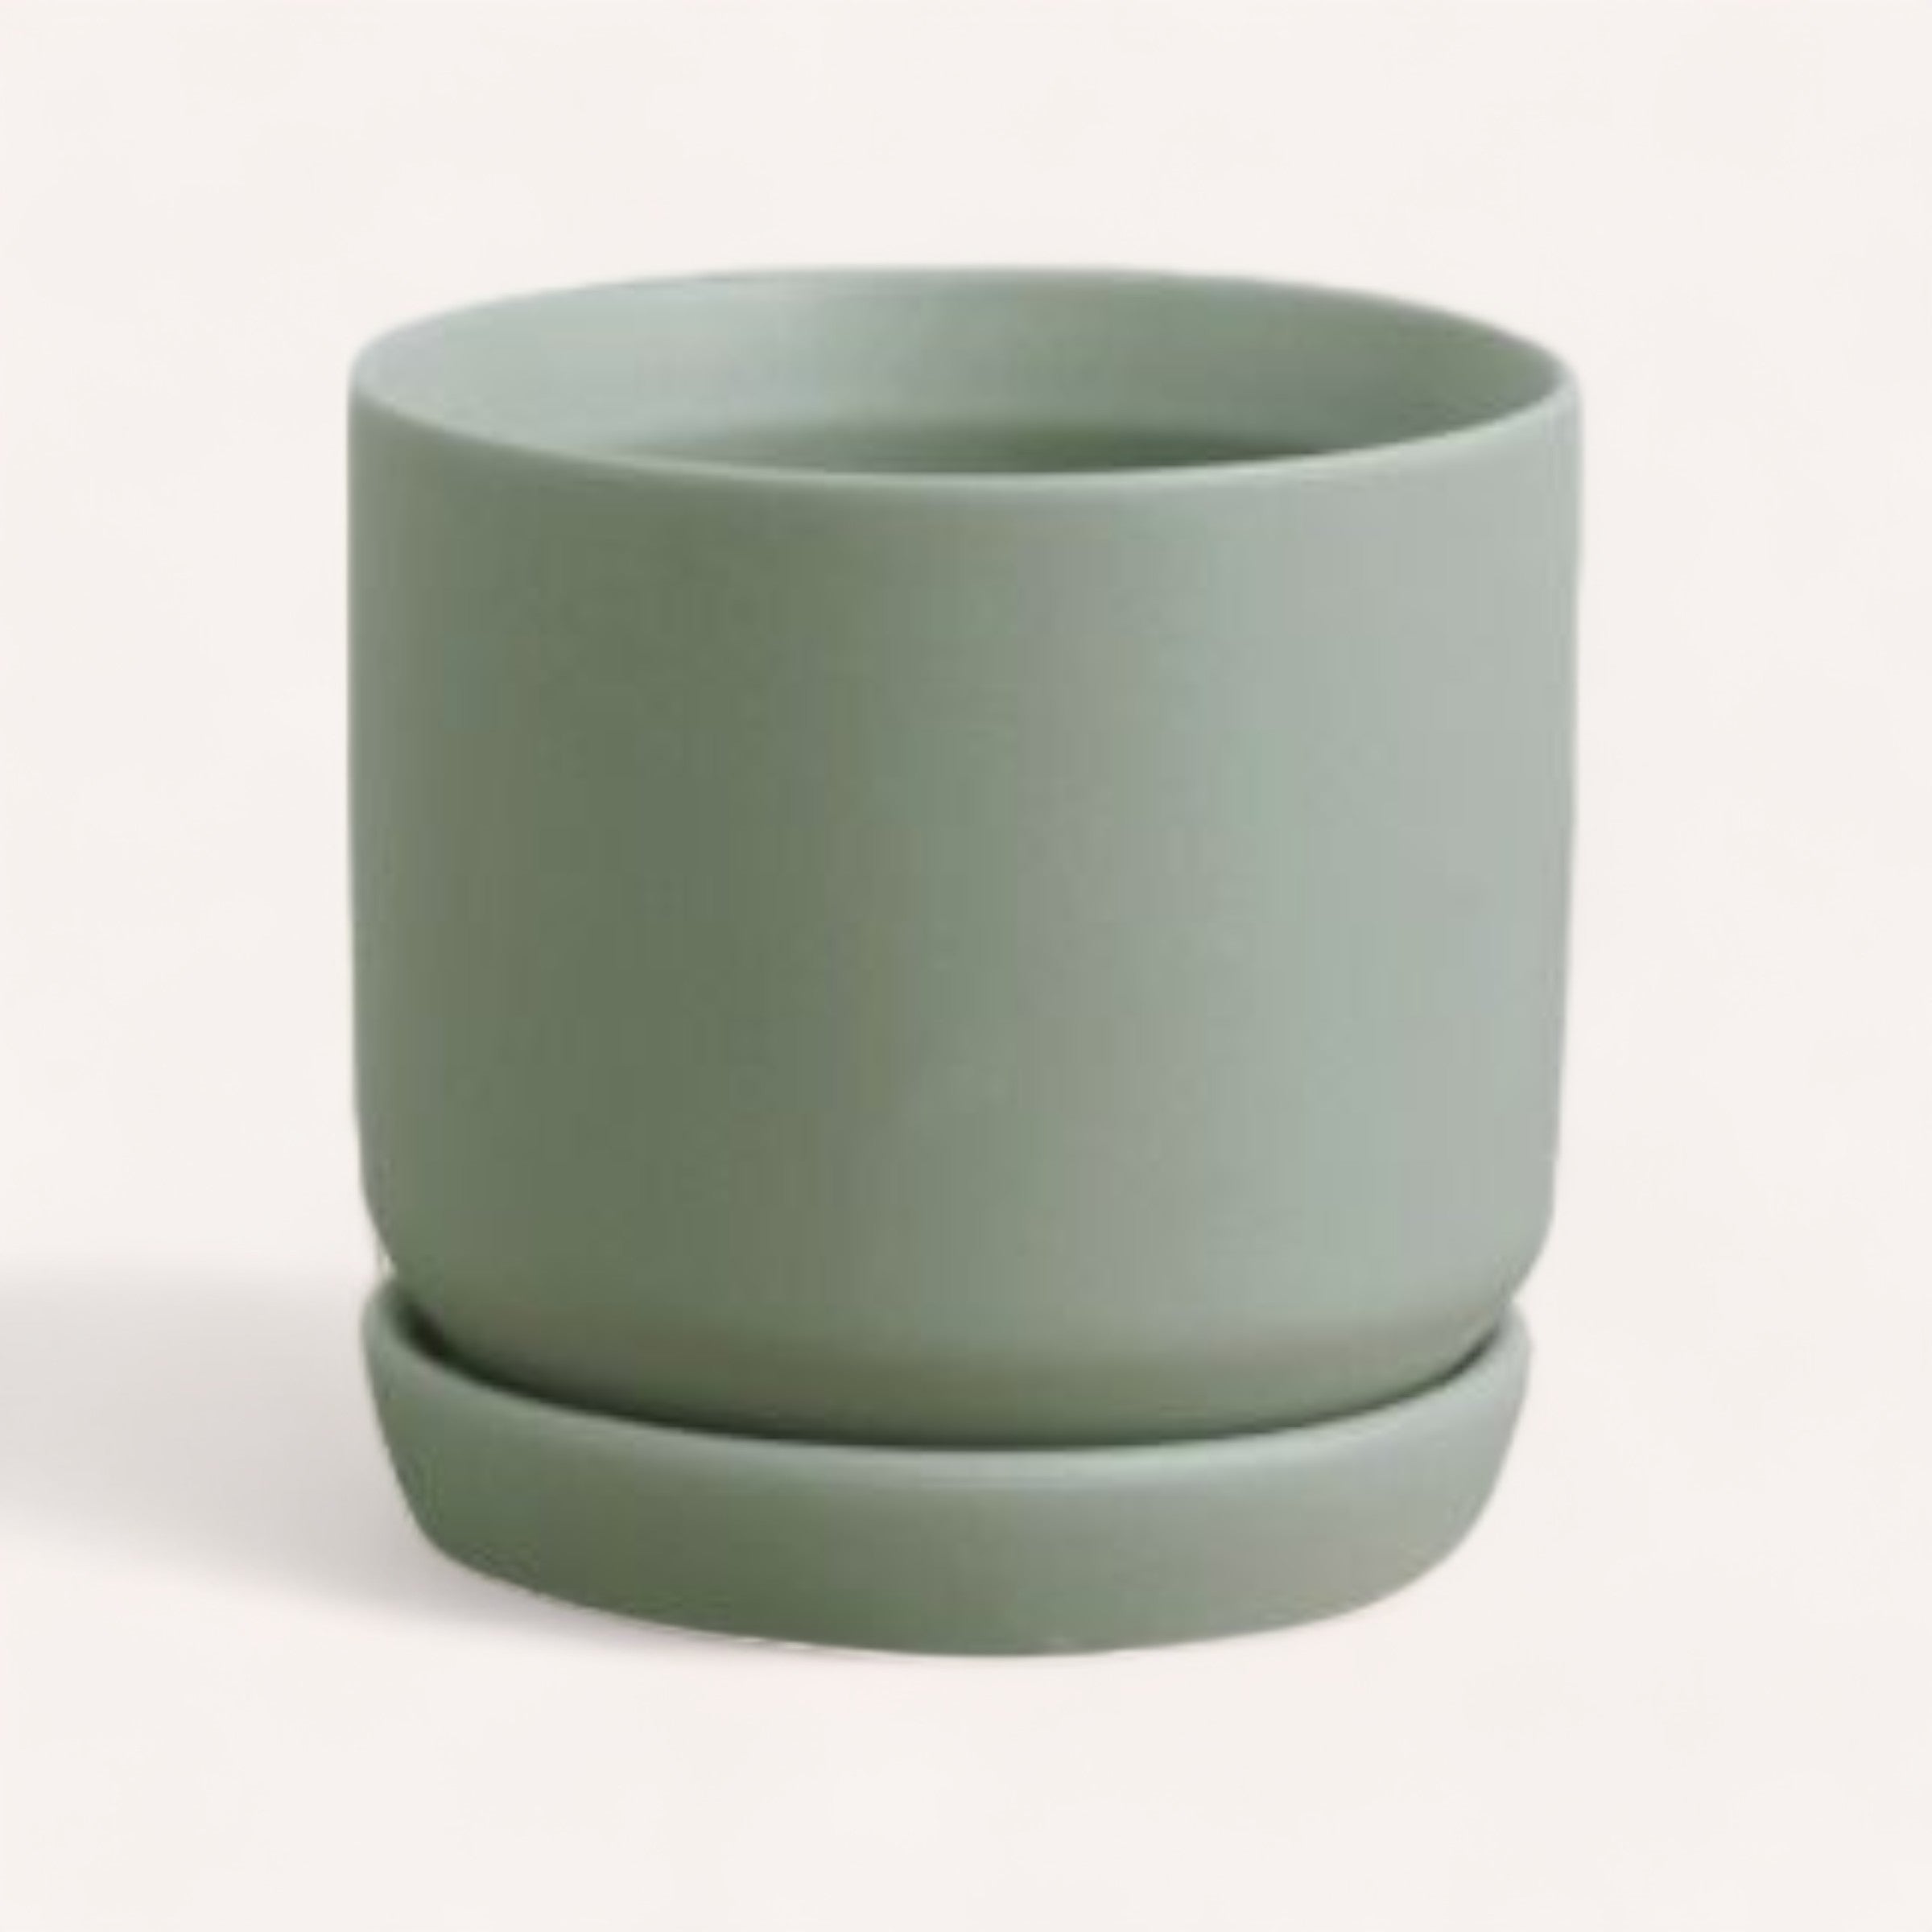 A simple, modern Oslo Planter by PottedNZ crafted in muted green stoneware, with an attached saucer base for drainage.